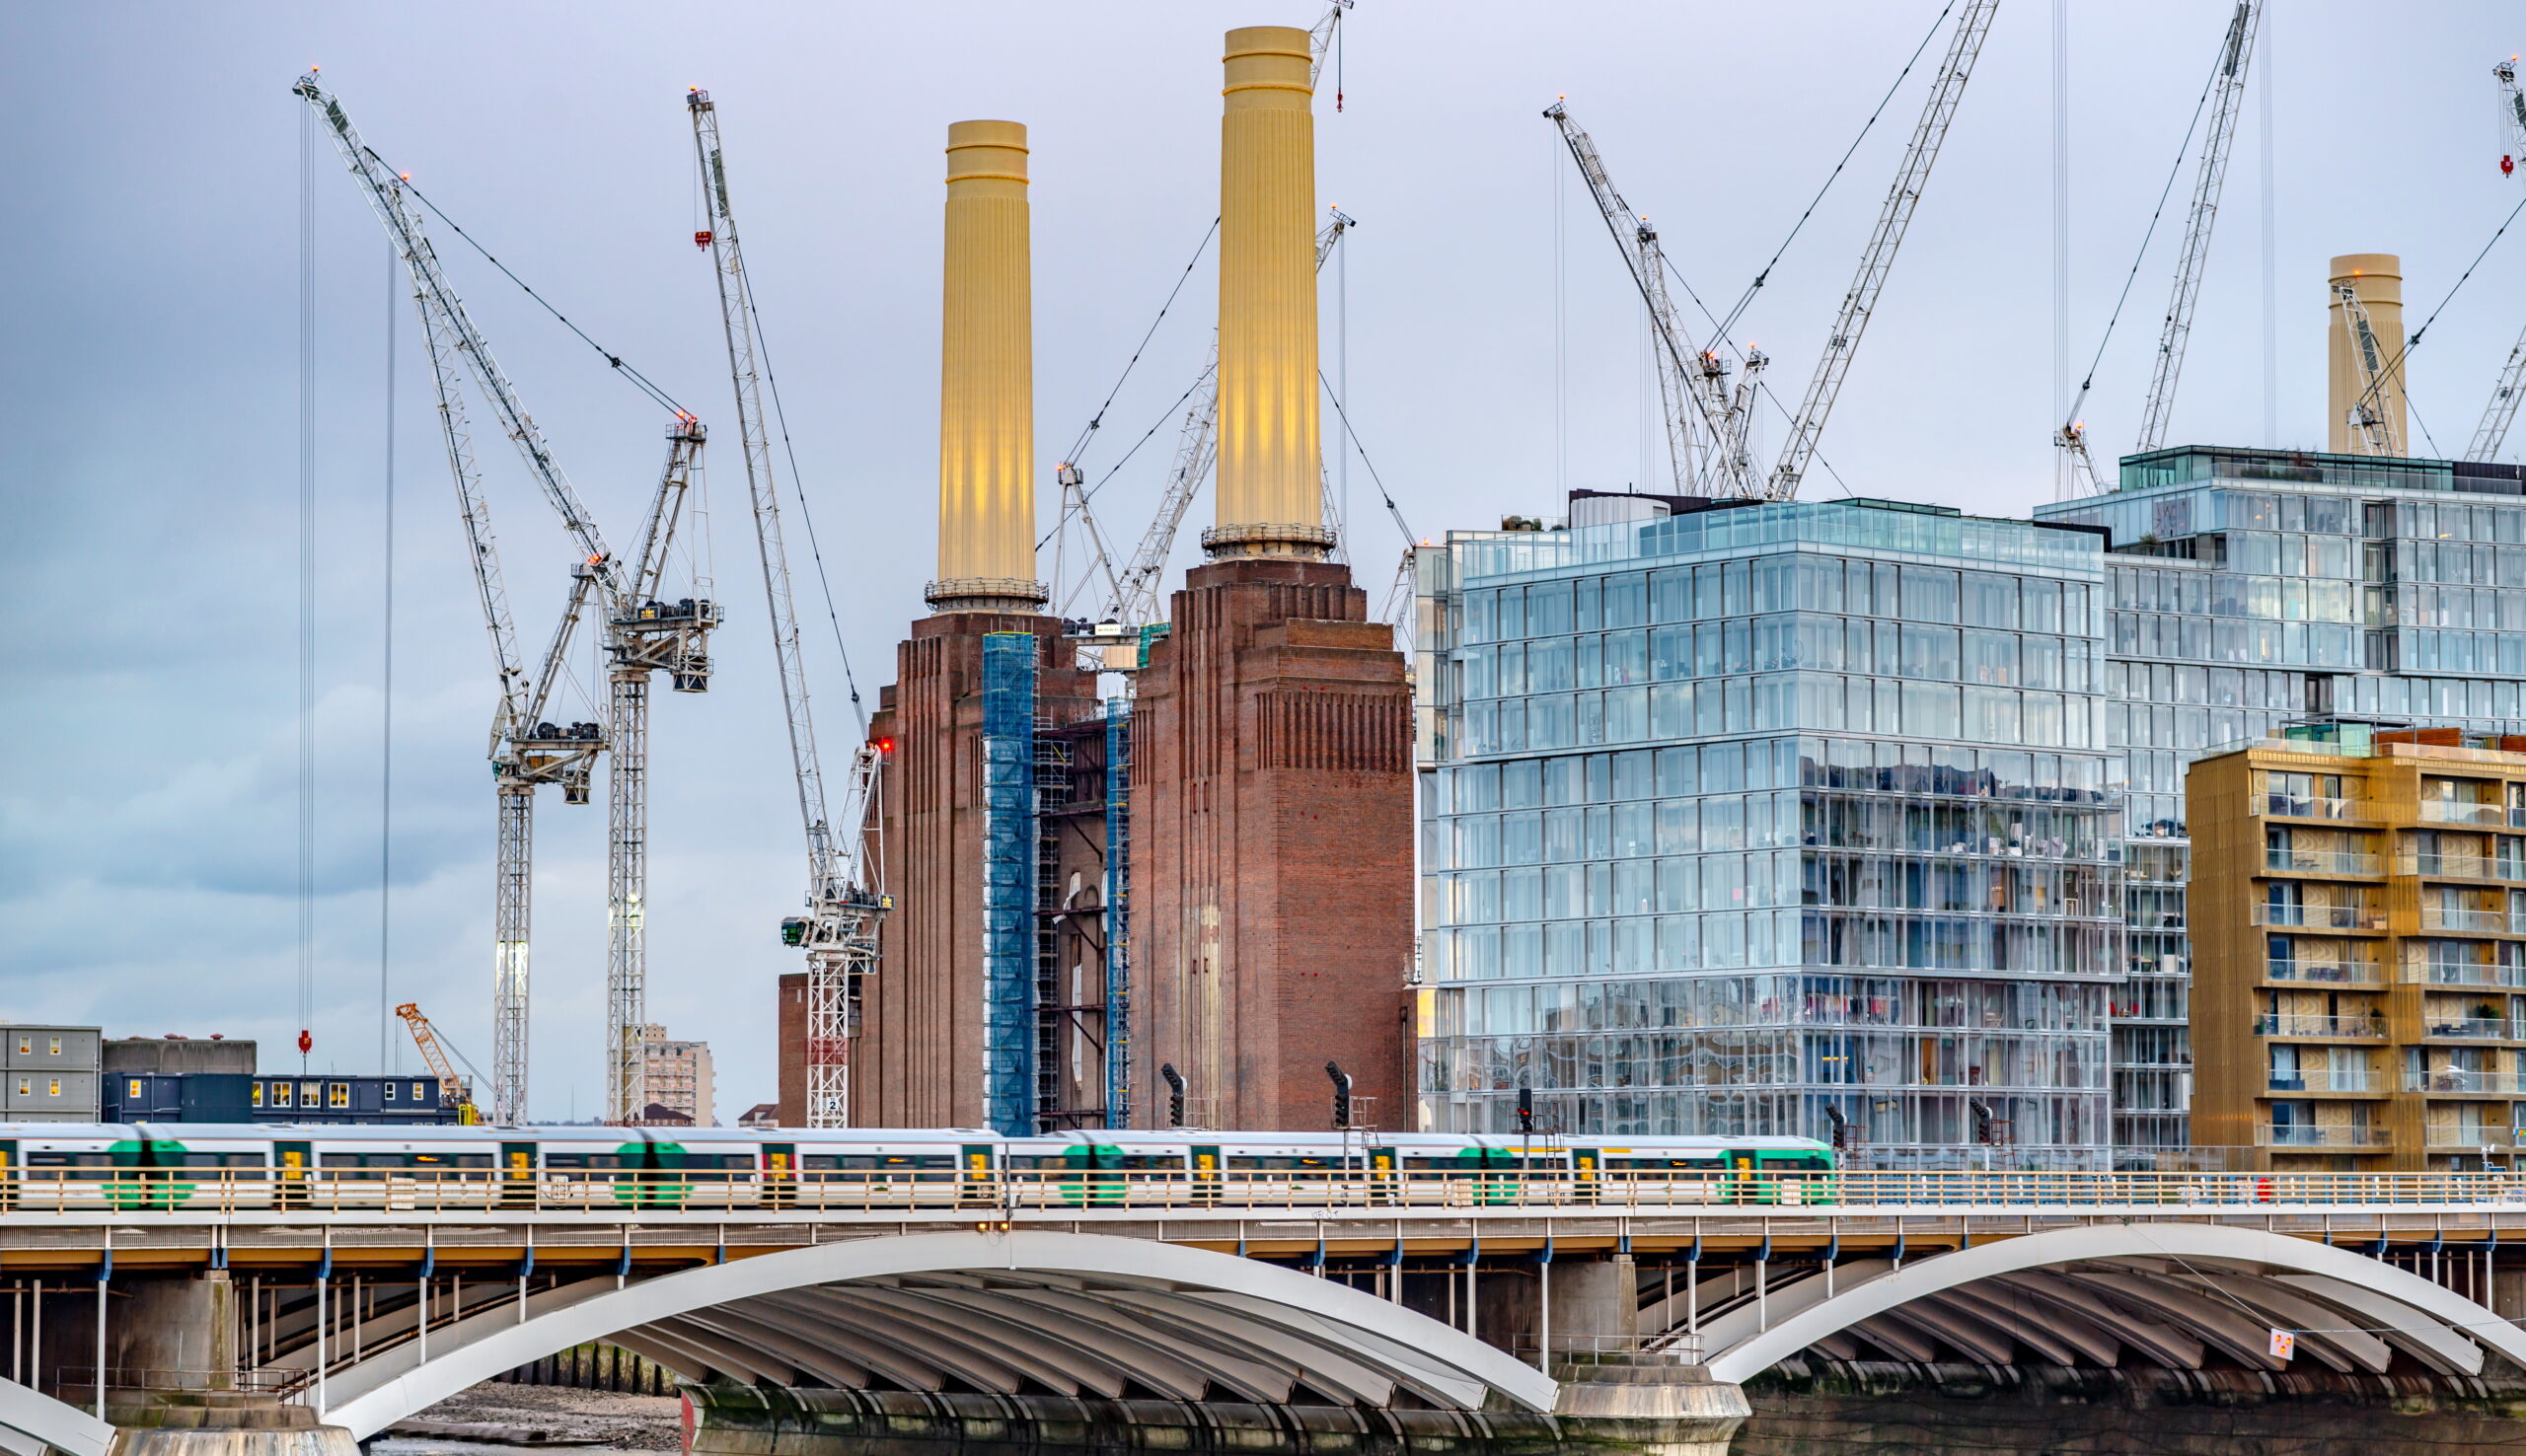 A photo of Battersea Power Station, London, surrounded by cranes with a railway bridge in the foreground.